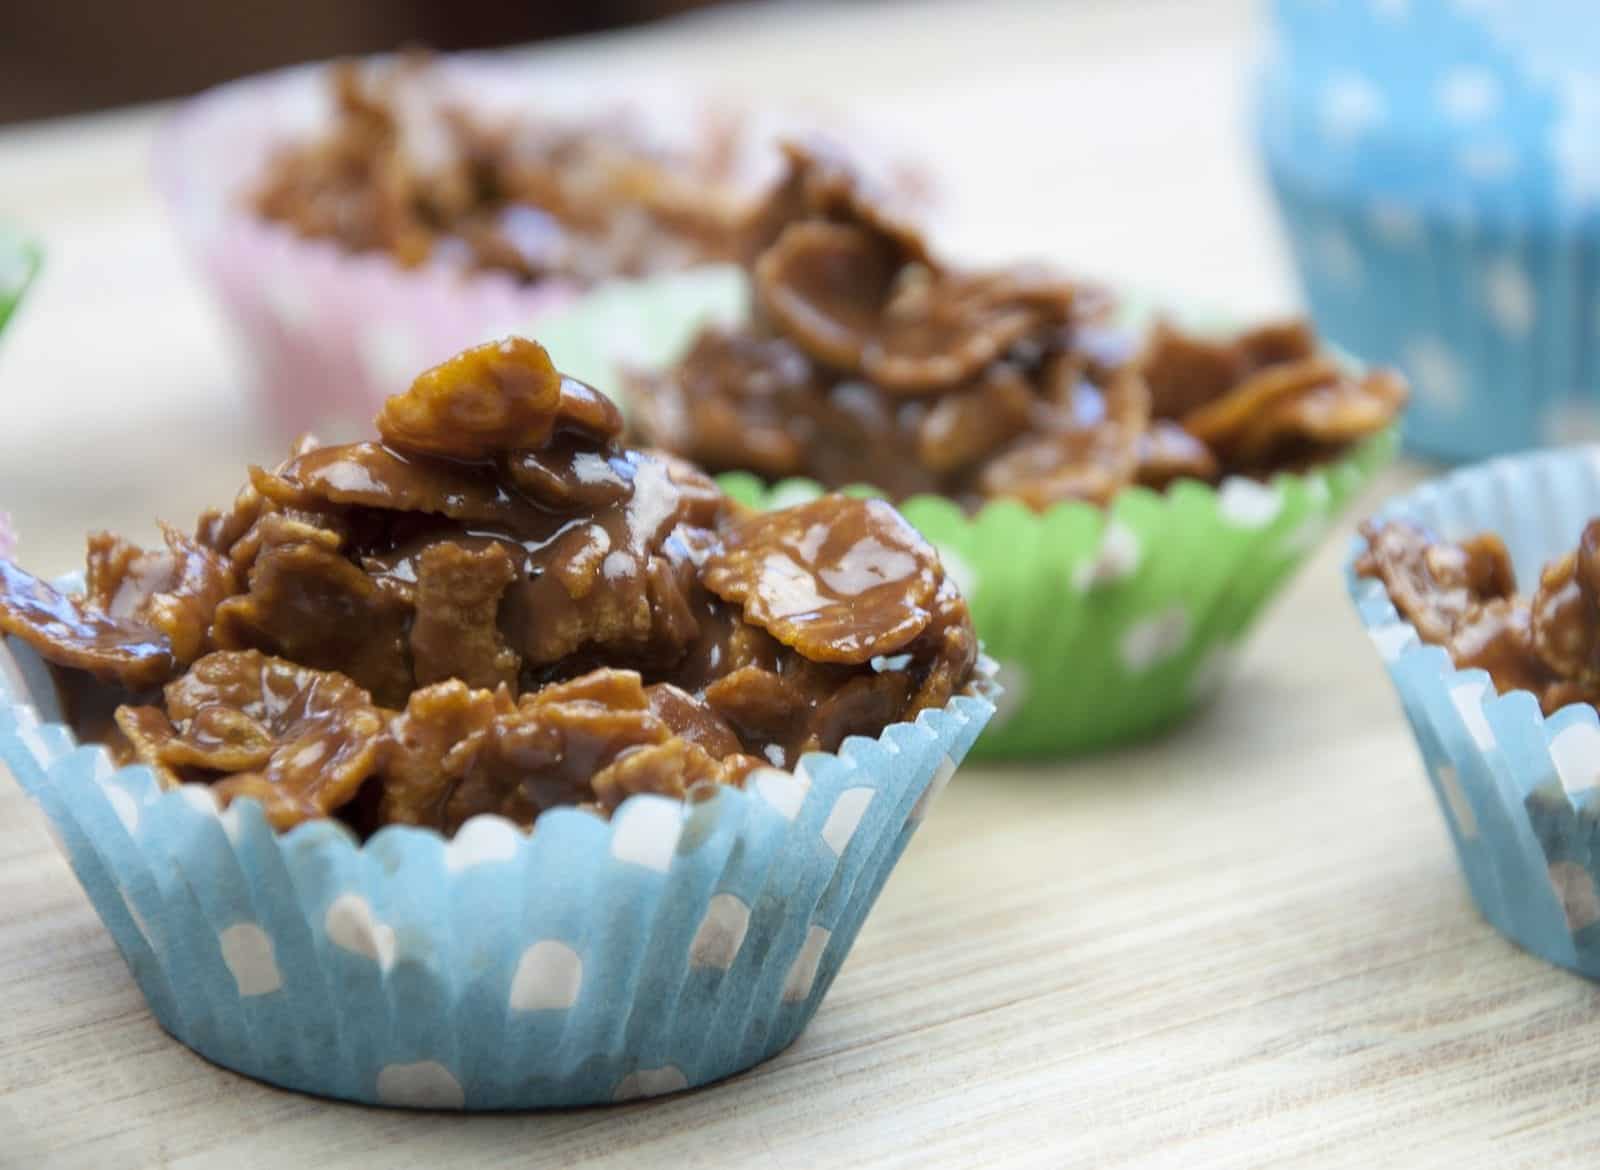 Chocolate cornflake cup cakes. What a recipe! So simple you can make it with the kids! Chocolate, sugar,butter and cornflakes. What could be more simple! Yum! | https://theyumyumclub.com